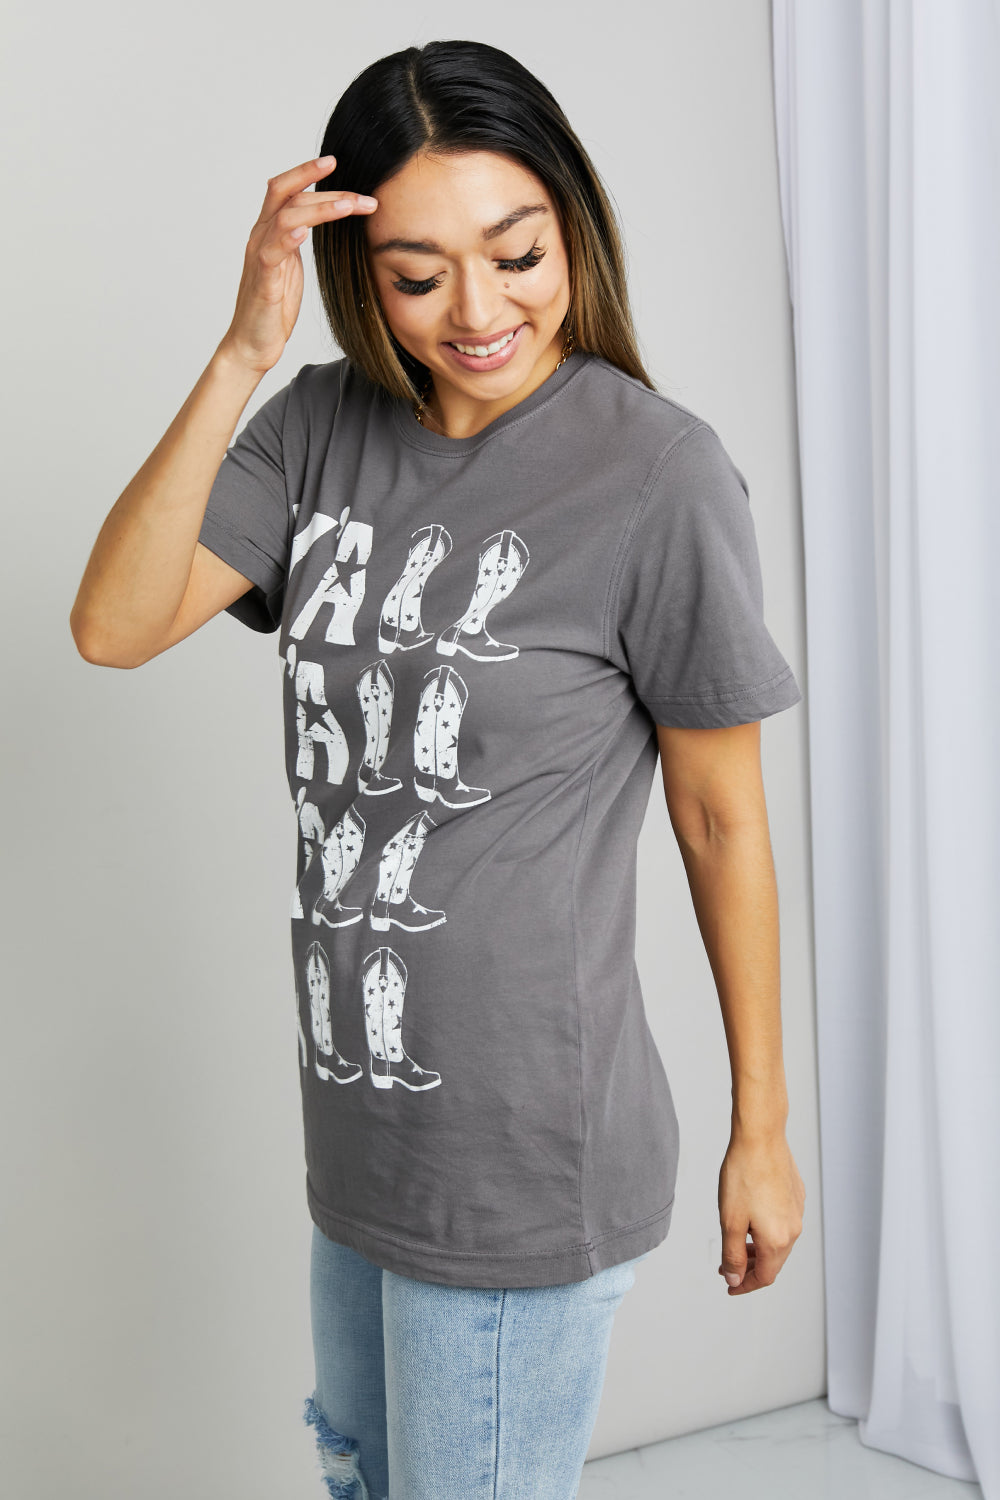 mineB Full Size Y'ALL Cowboy Boots Graphic Tee free shipping -Oh Em Gee Boutique